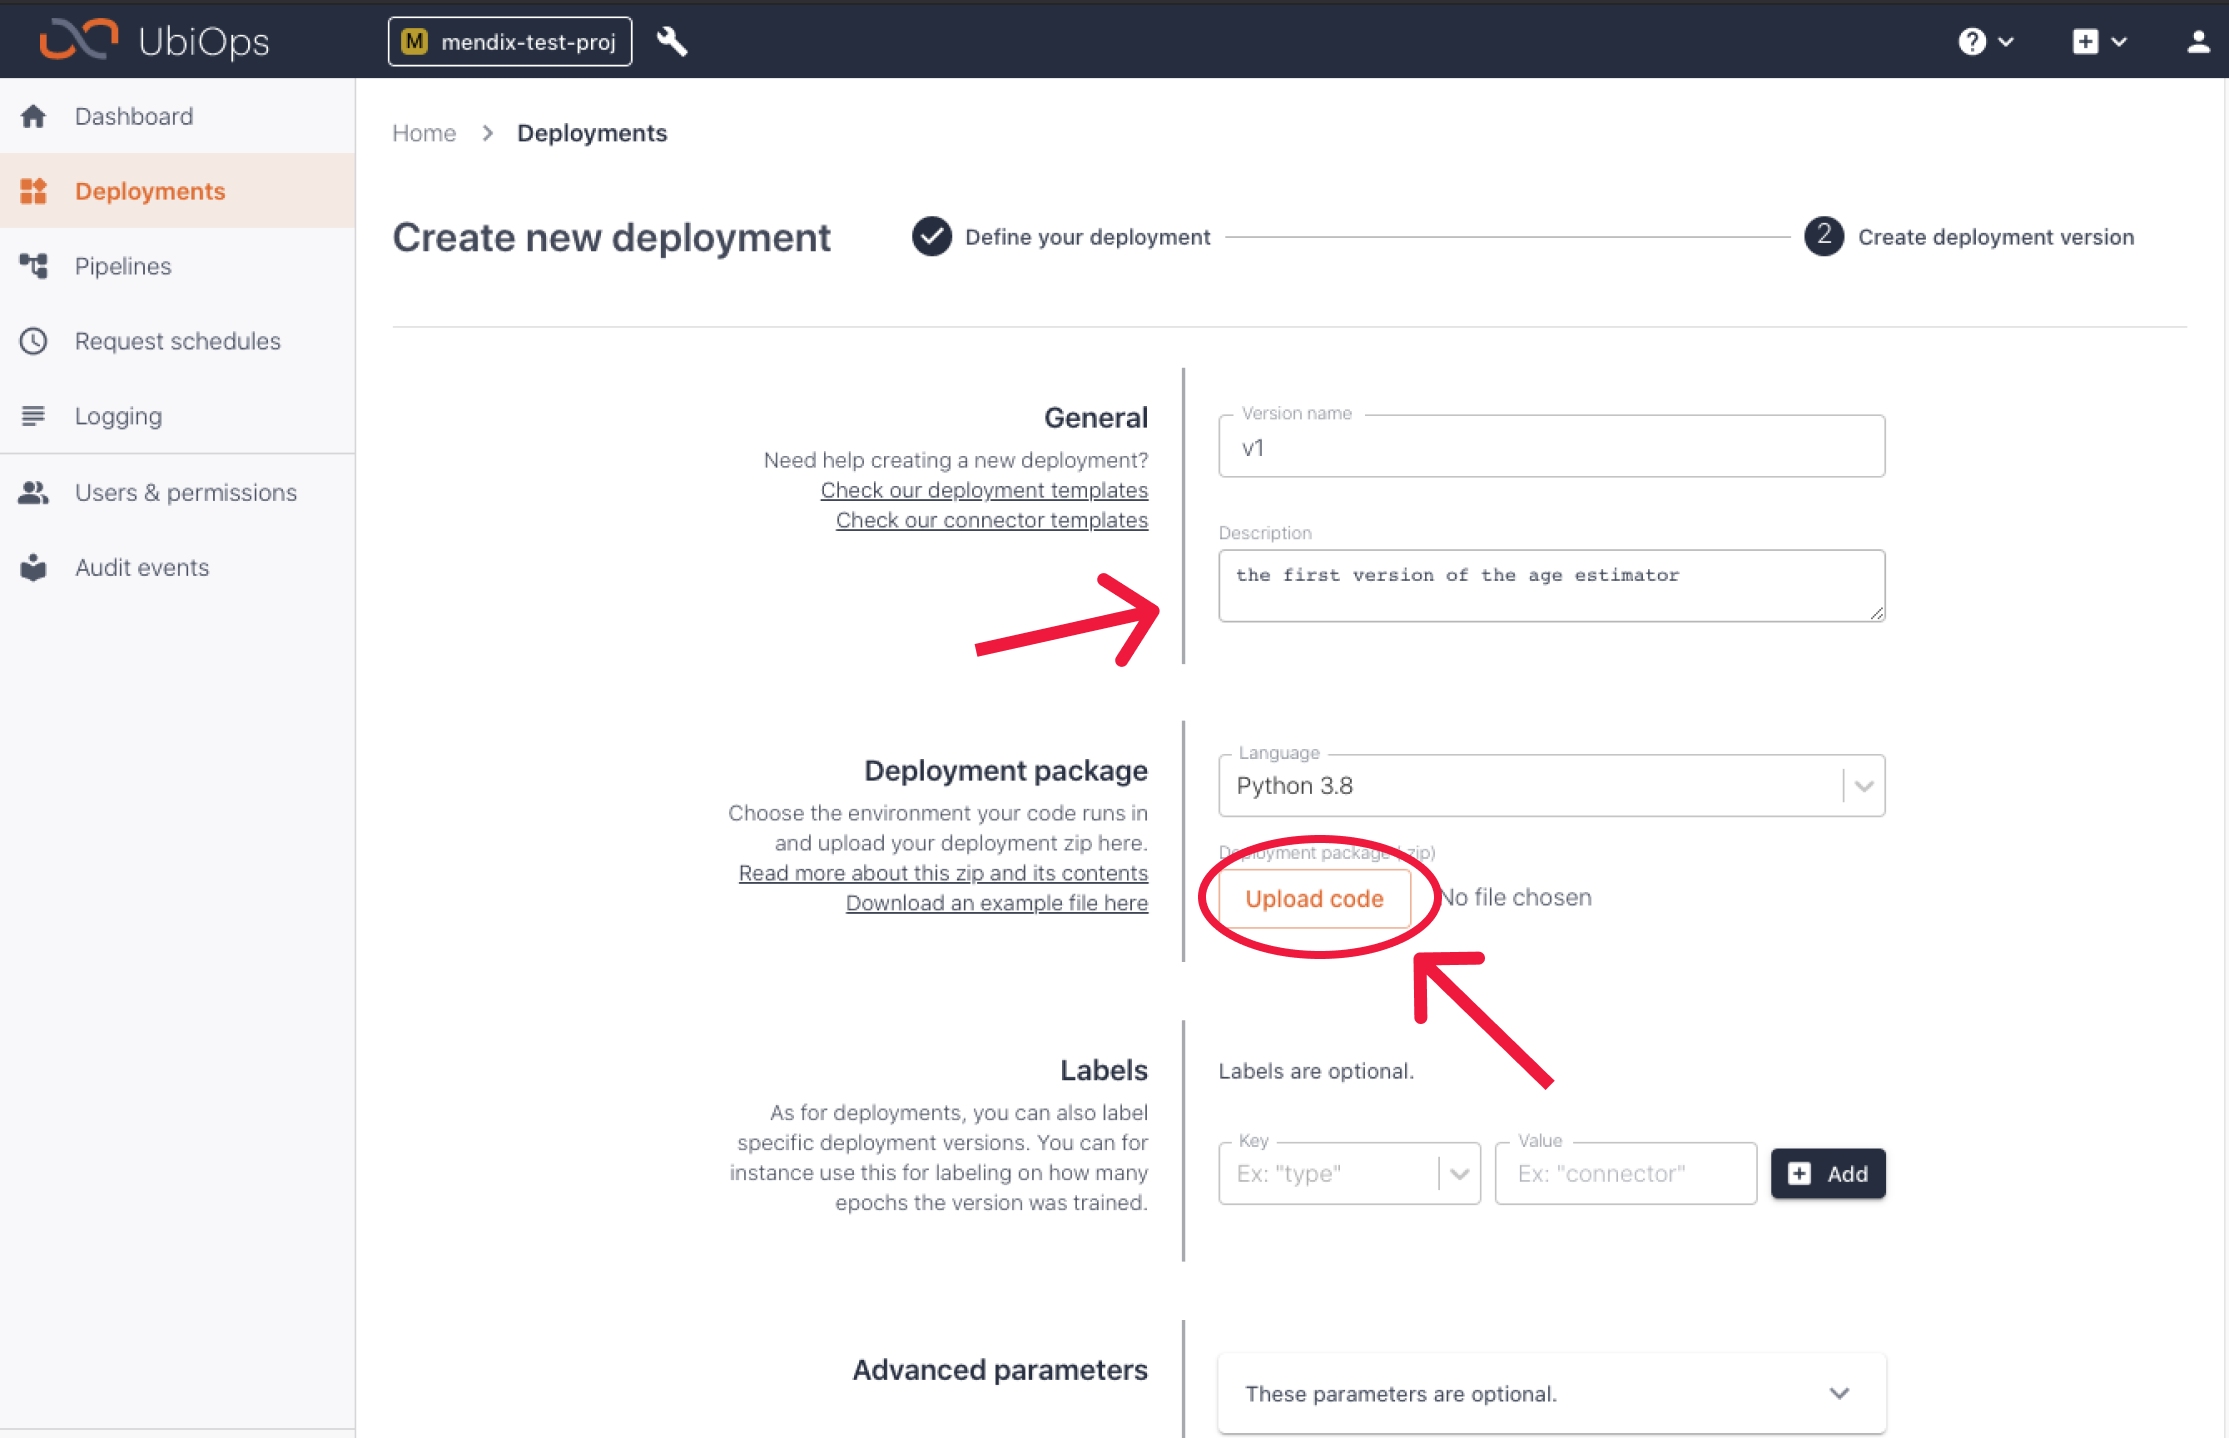 Figure 6: Uploading our code (deployment package) in UbiOps